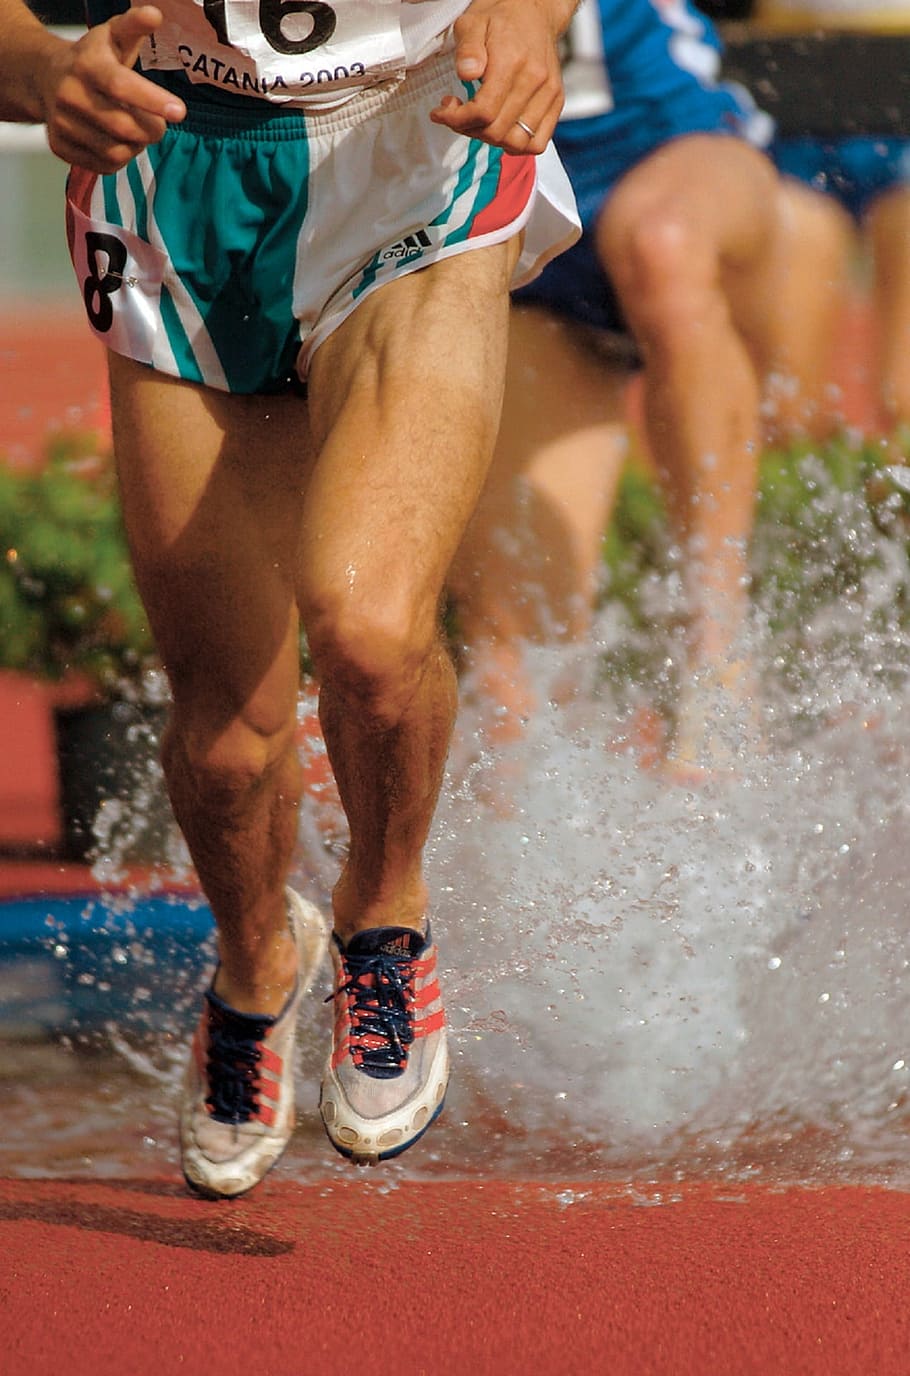 man jogging, runners legs, competition, race, feet, water, shoes, sport, athlete, fitness